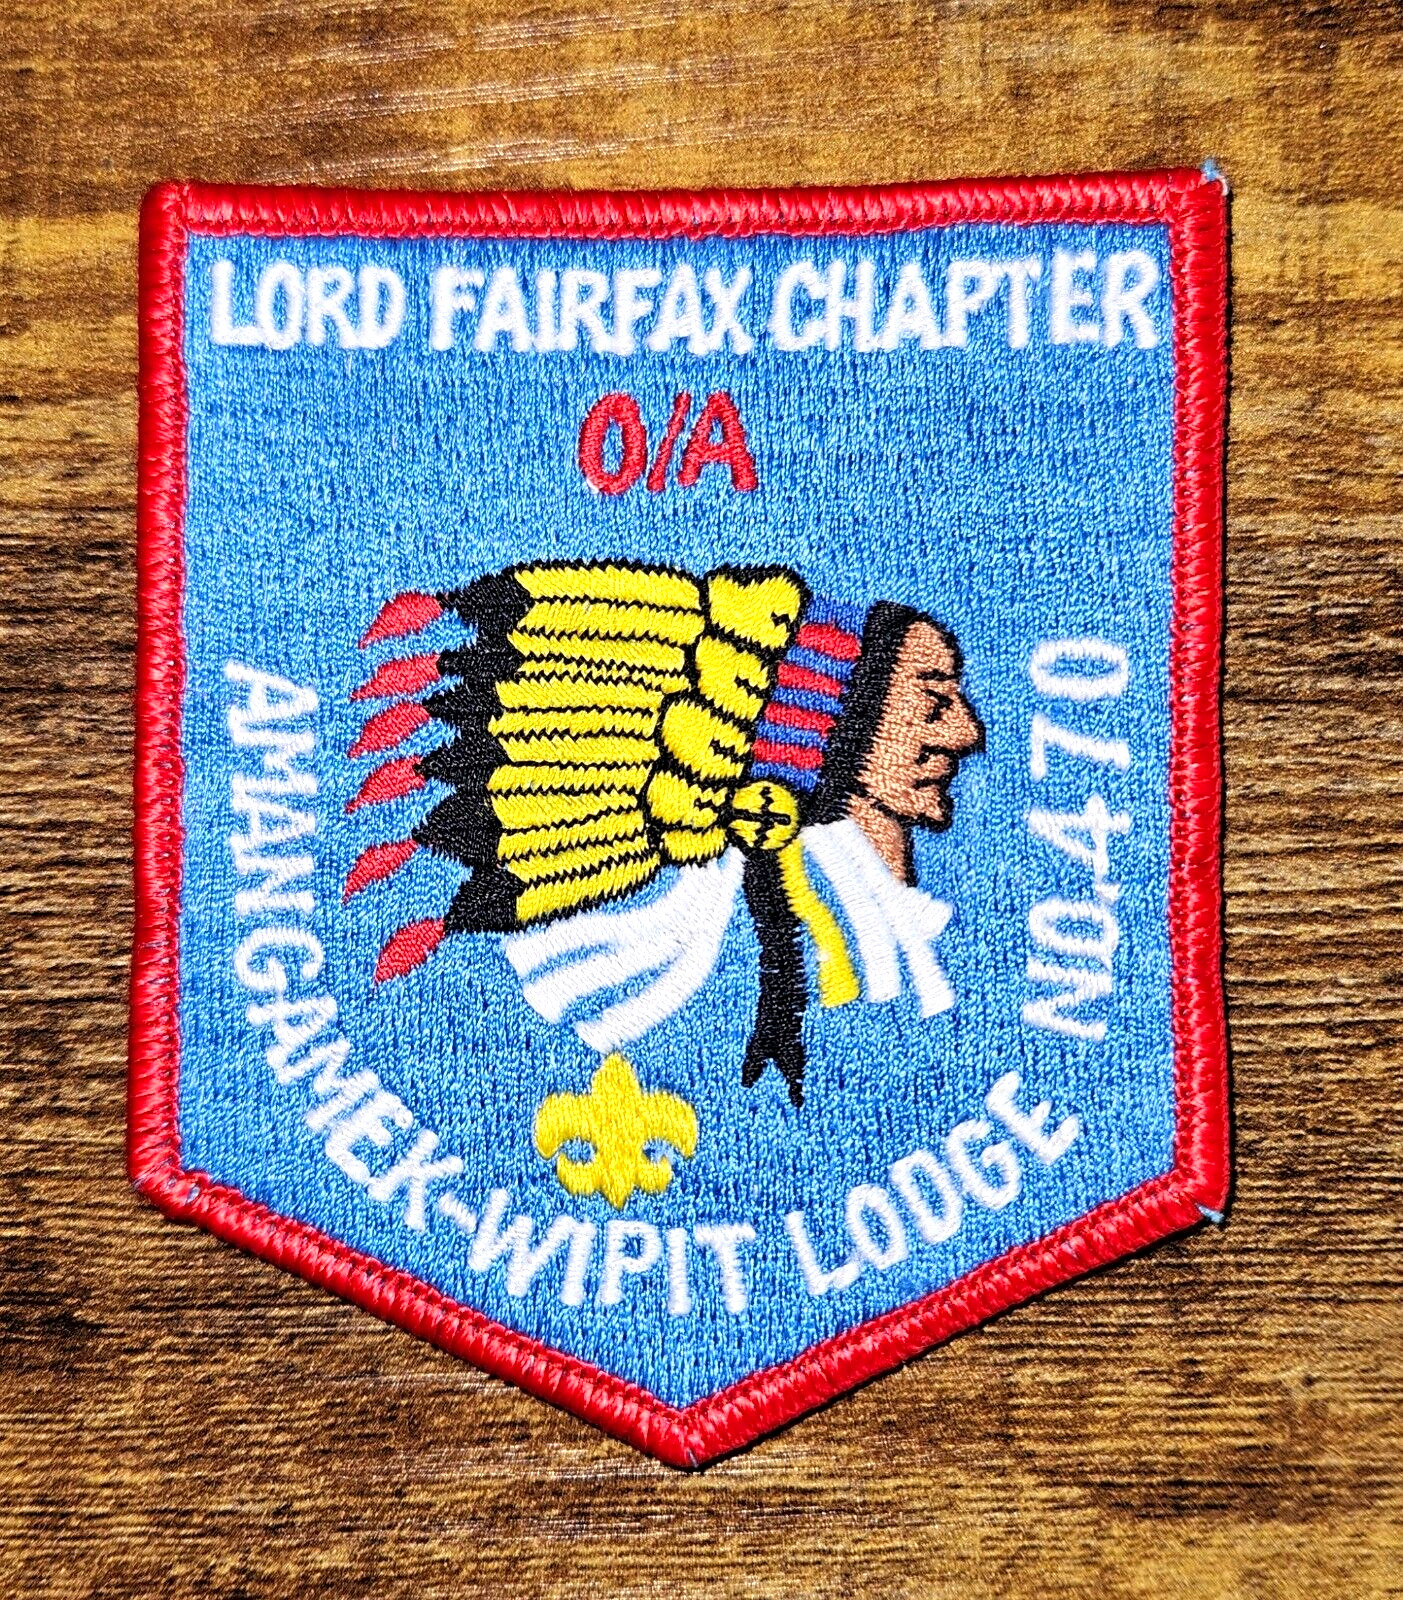 Amangamek Wipit OA Lodge 470 Vintage Lord Fairfax Chapter Virginia NCAC Patch